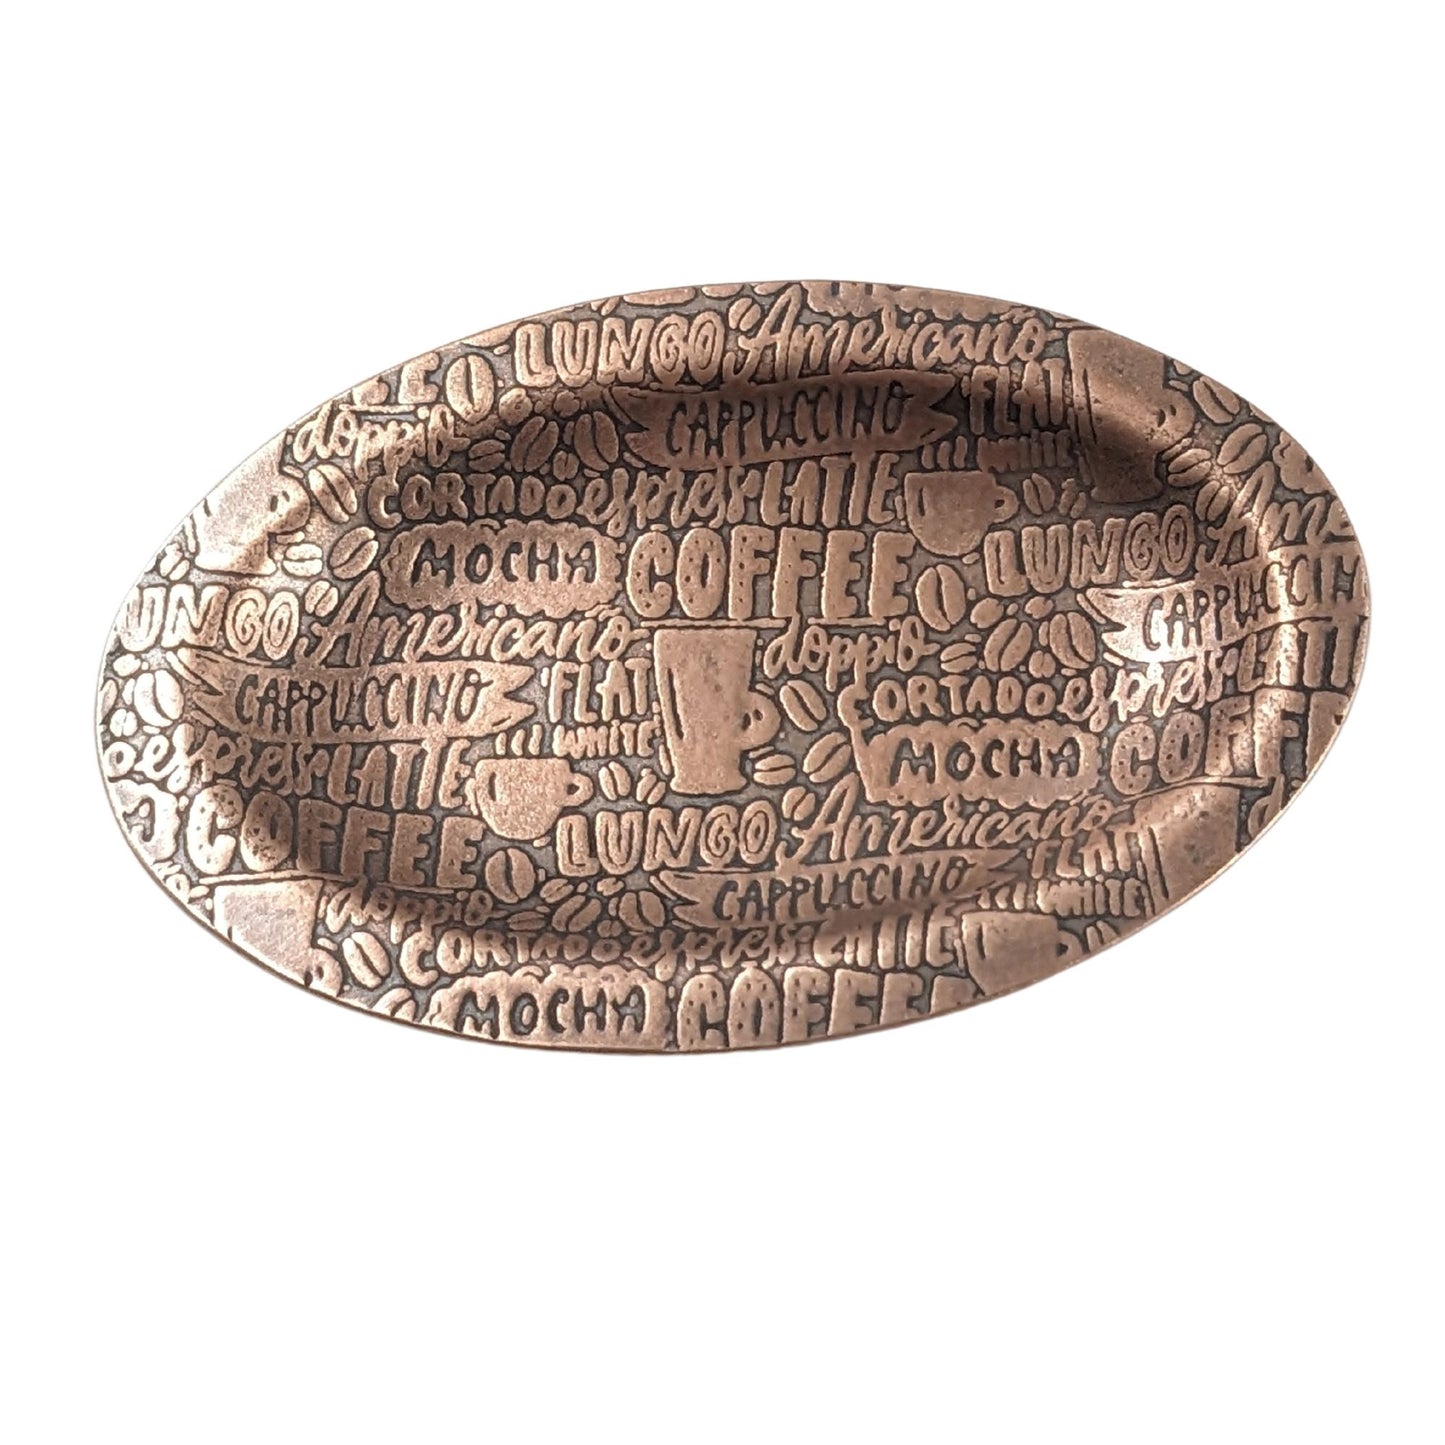 An oval copper ring dish with a raised edge. The dish has an impressed pattern of coffee order names.